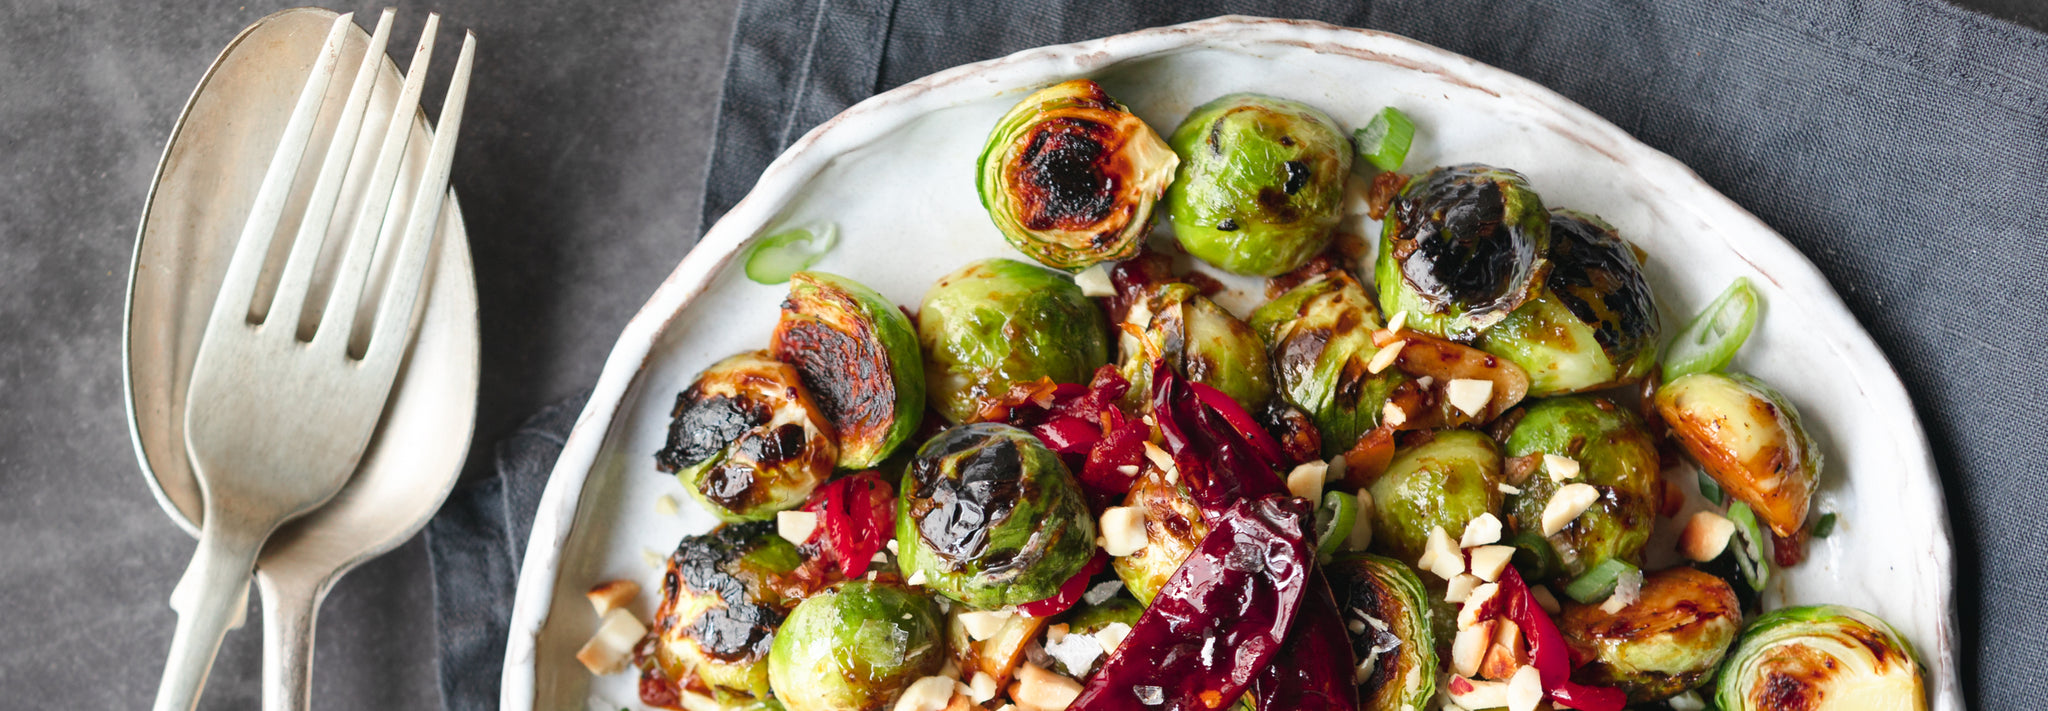 Kung Pao Brussels Sprouts - Recipe - Roccbox